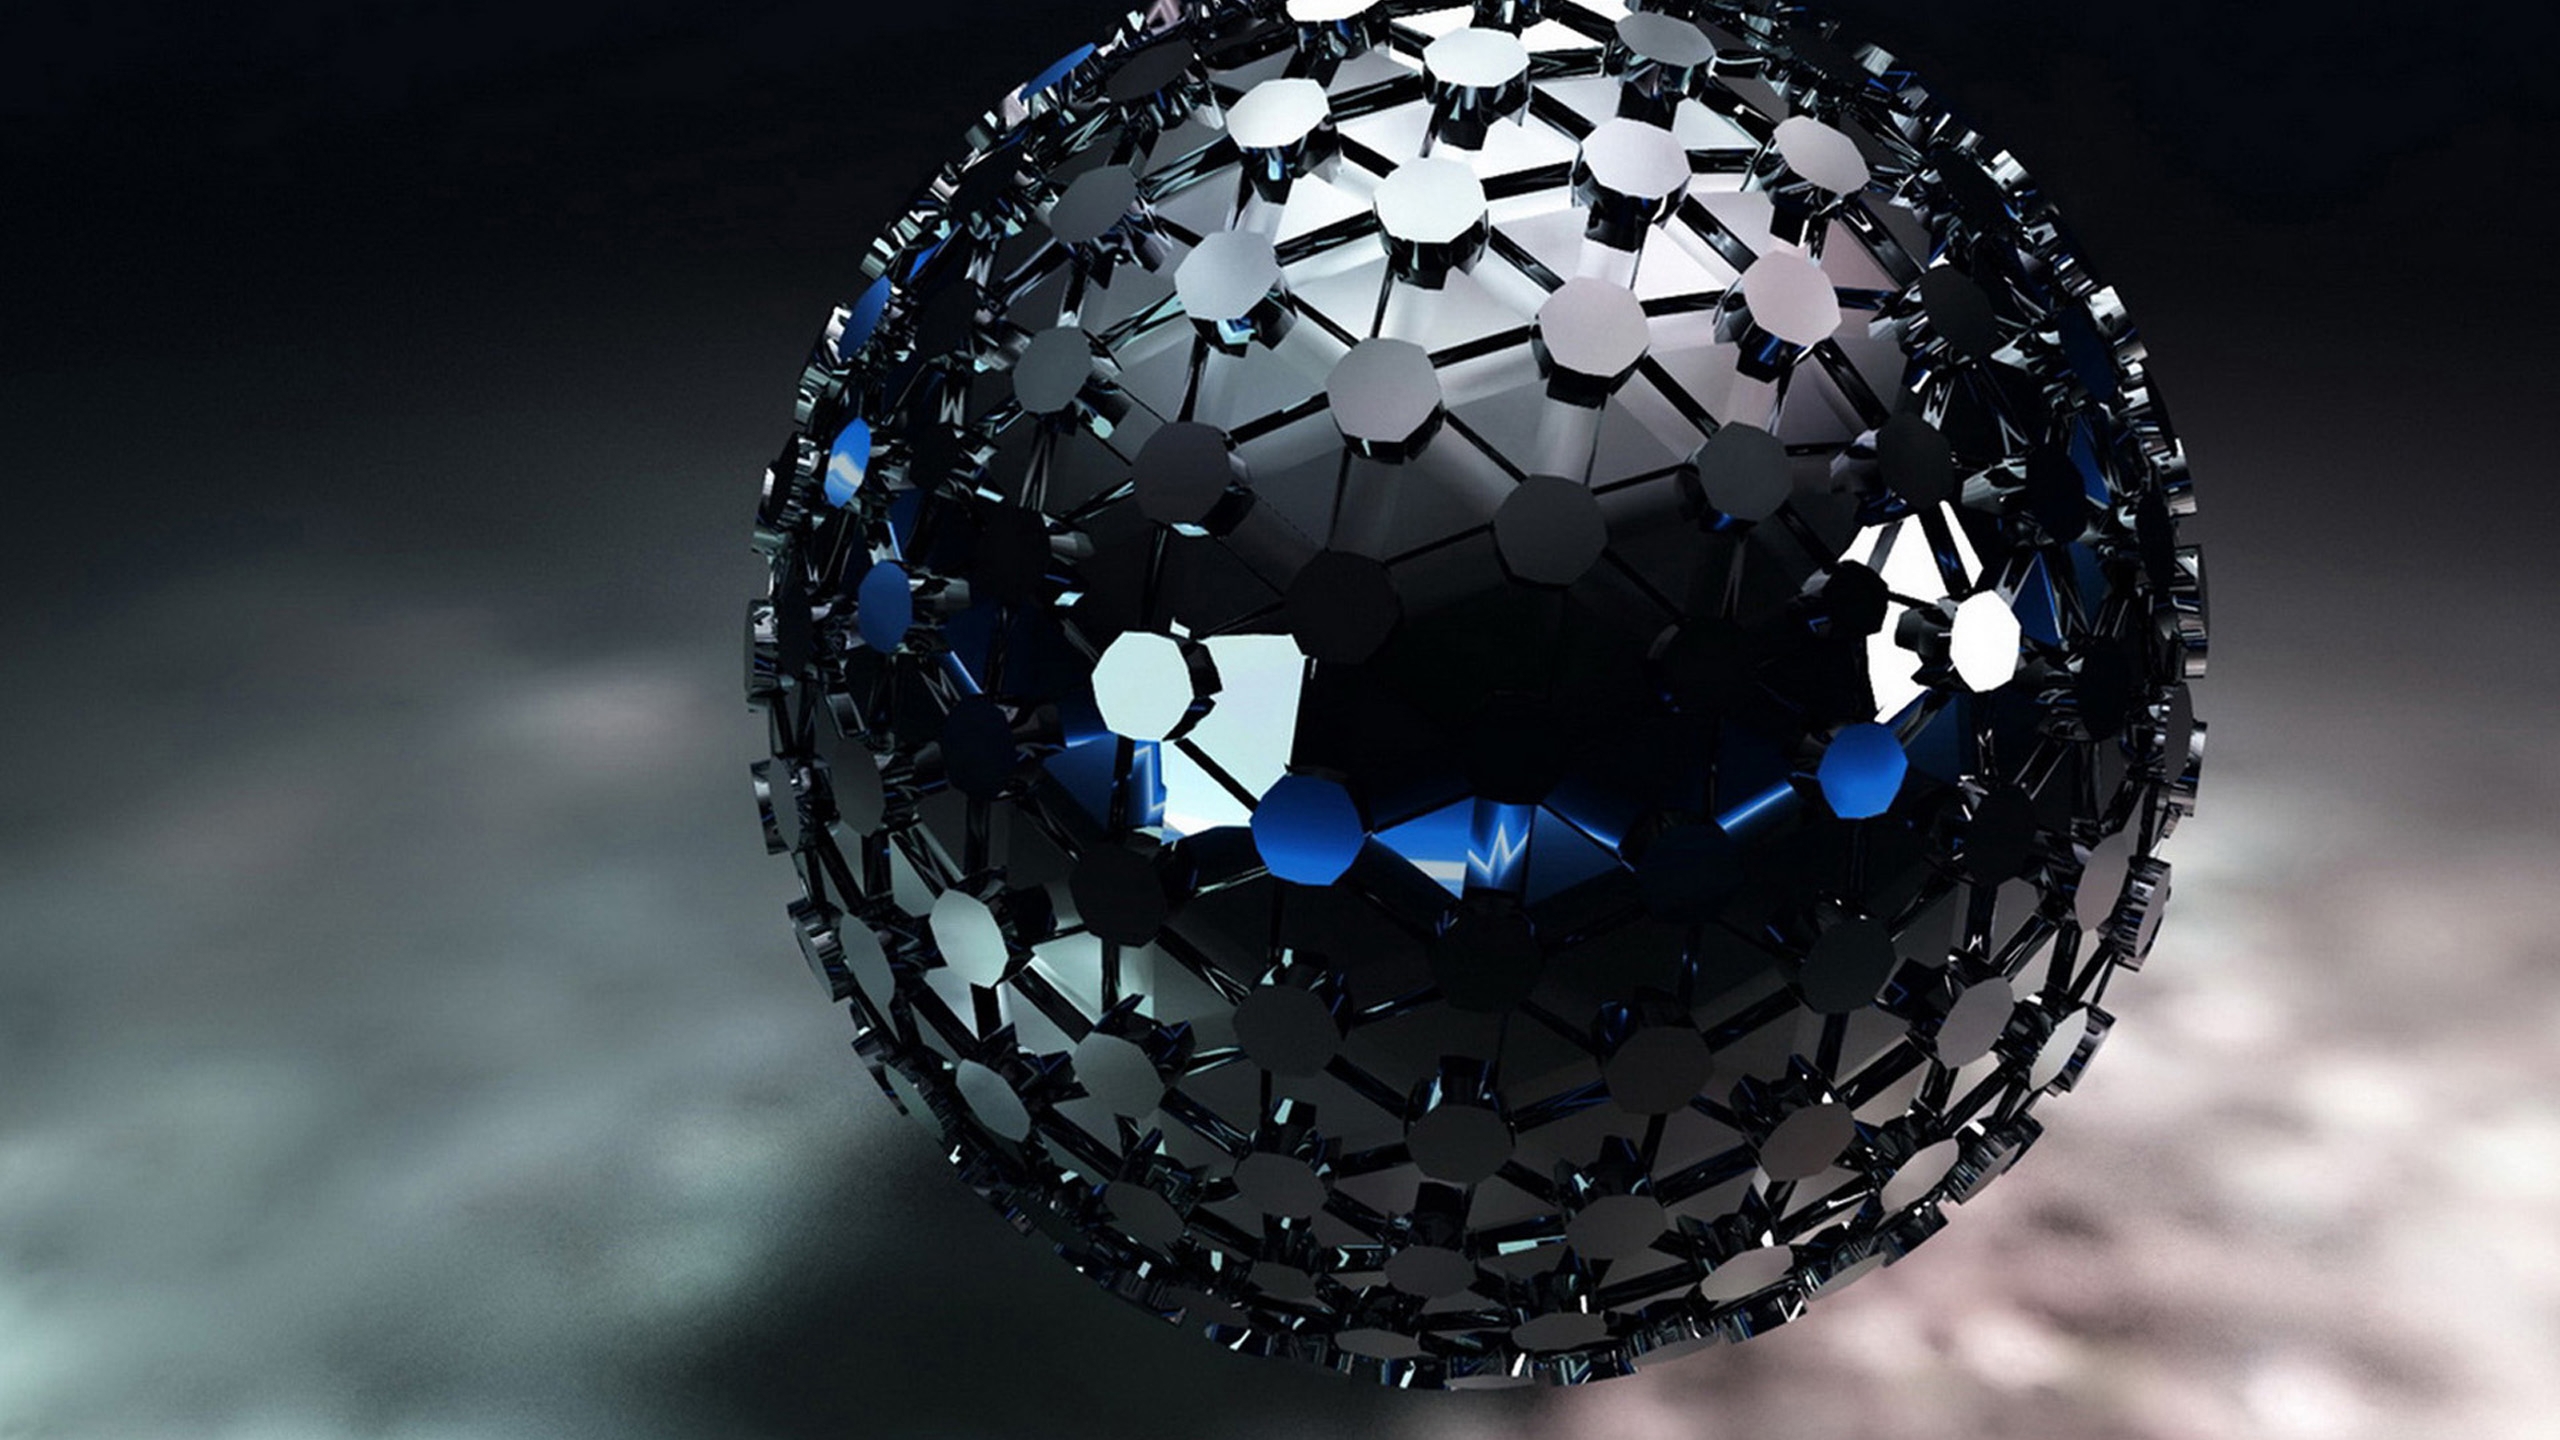 Image: Black ball, sphere, hexagons, triangles